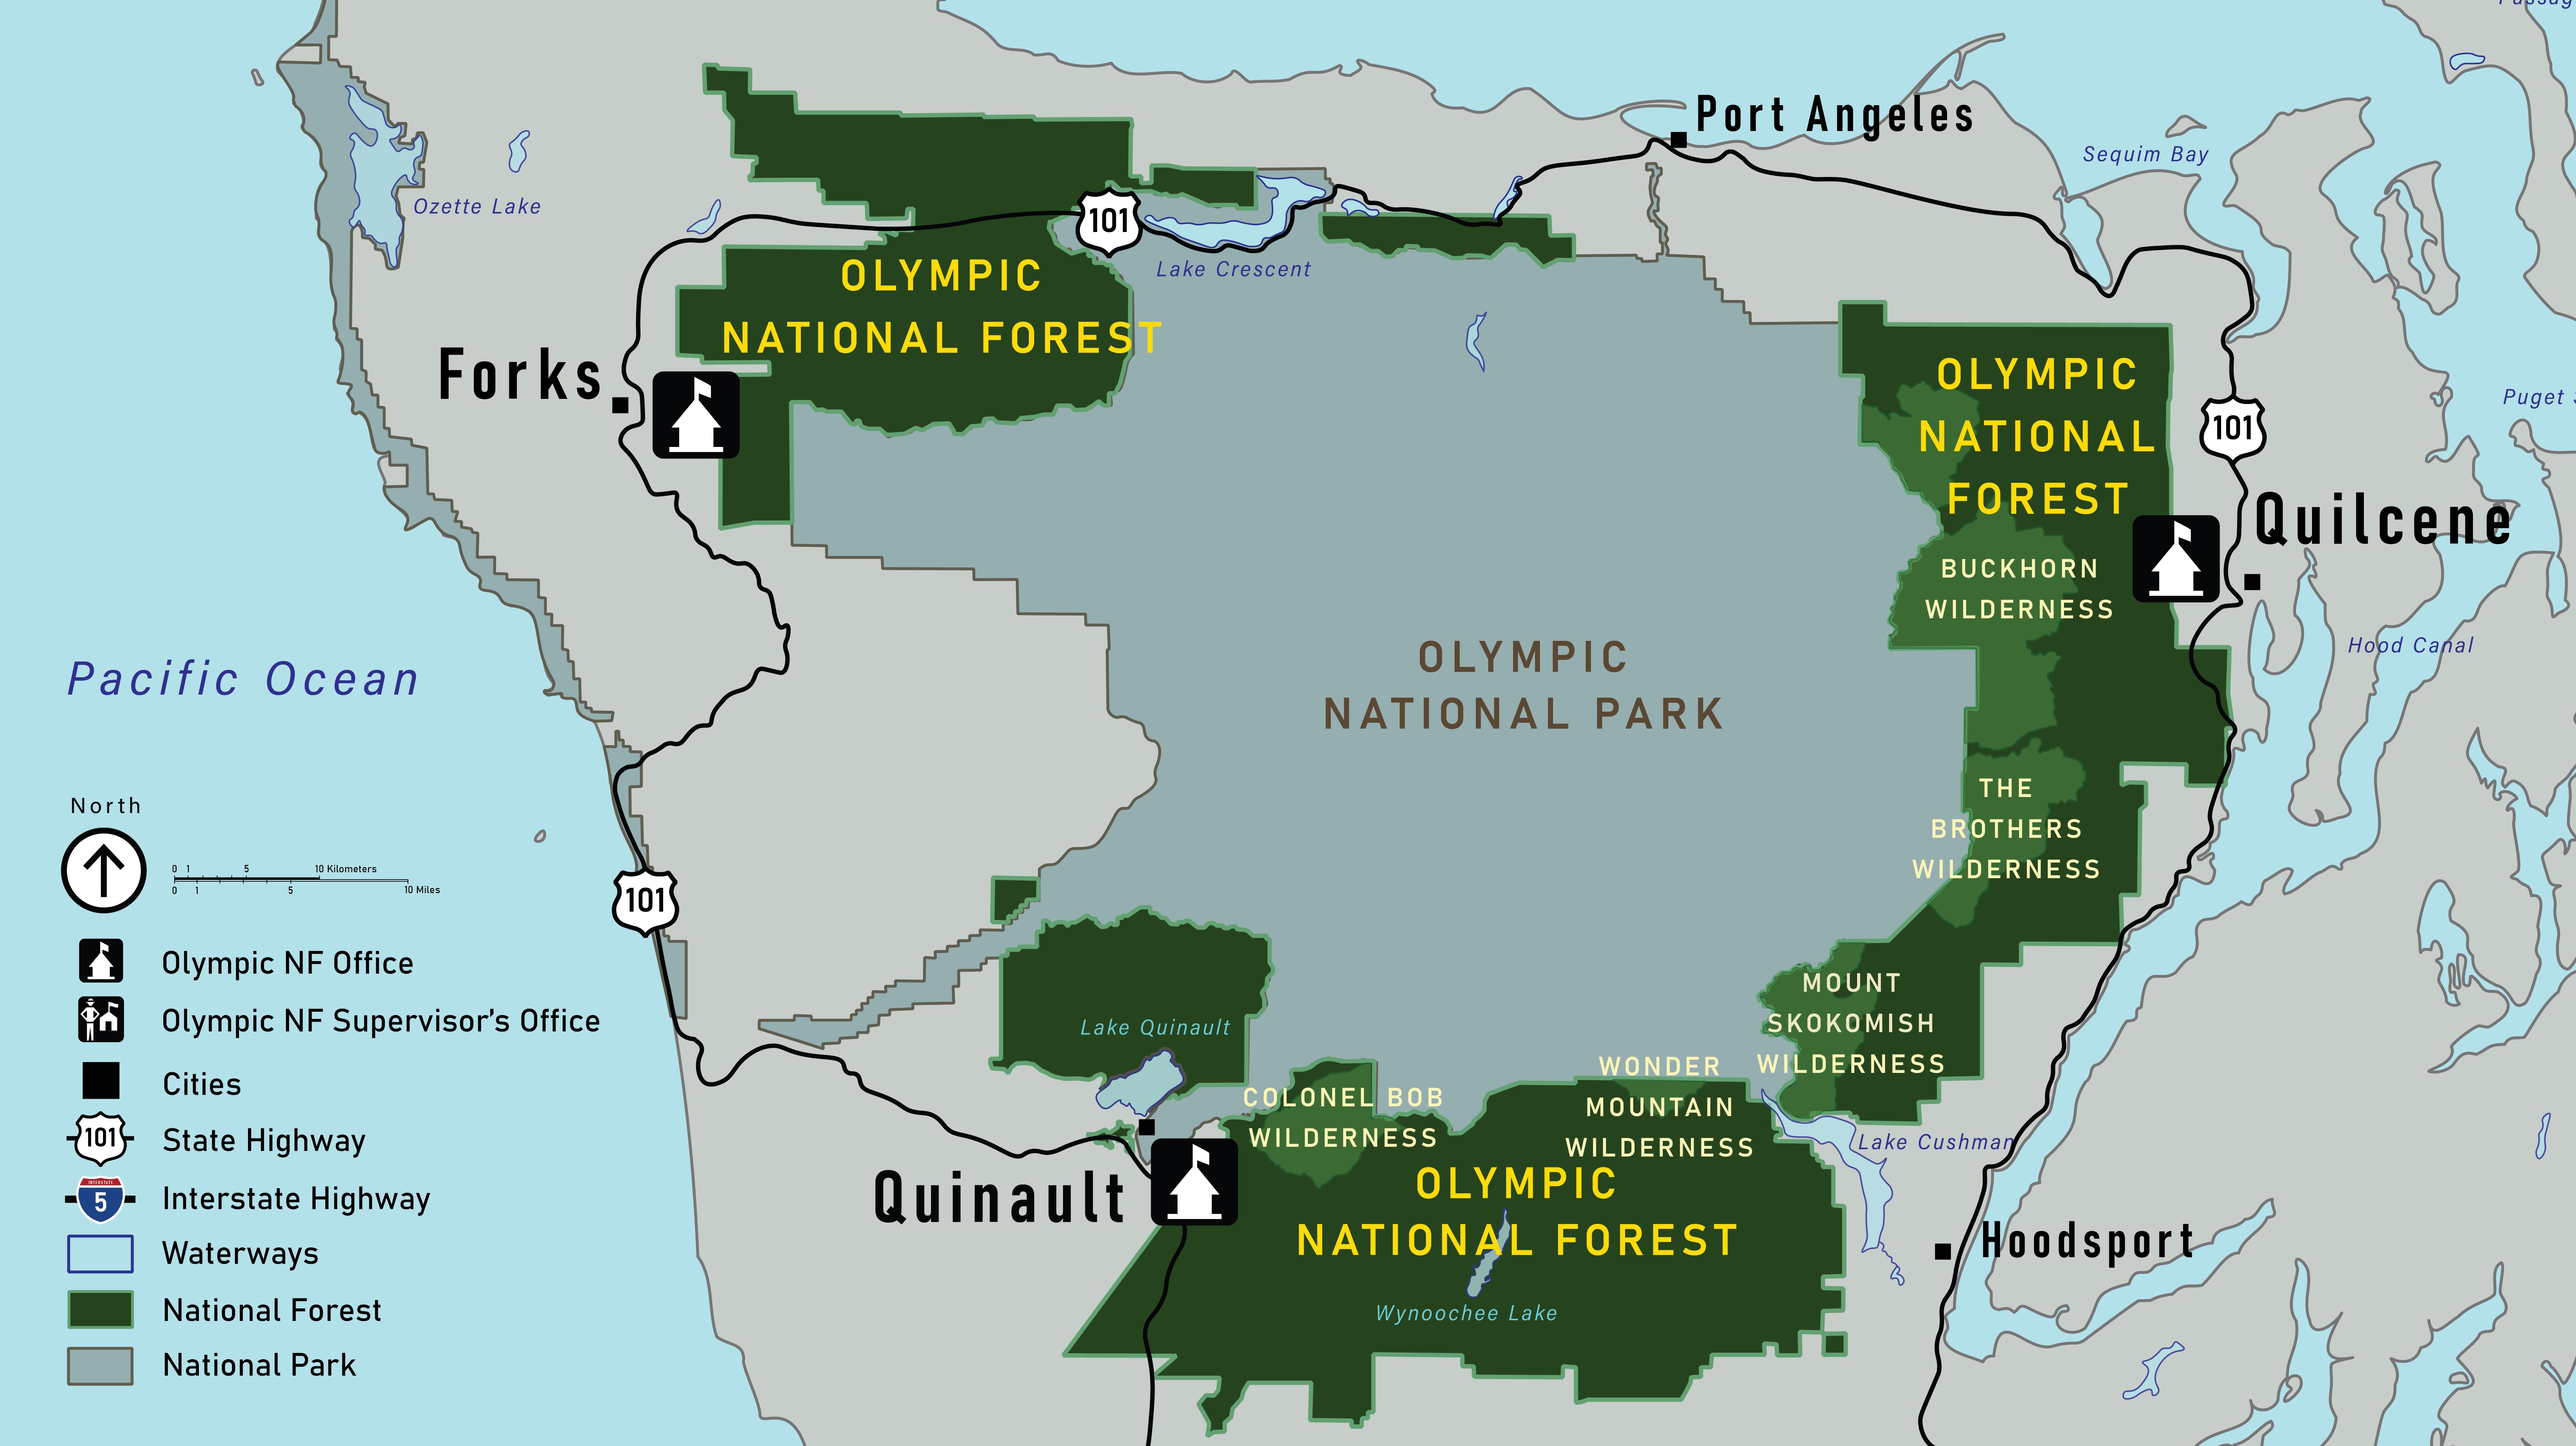 Map of Olympic National Forest including wilderness areas